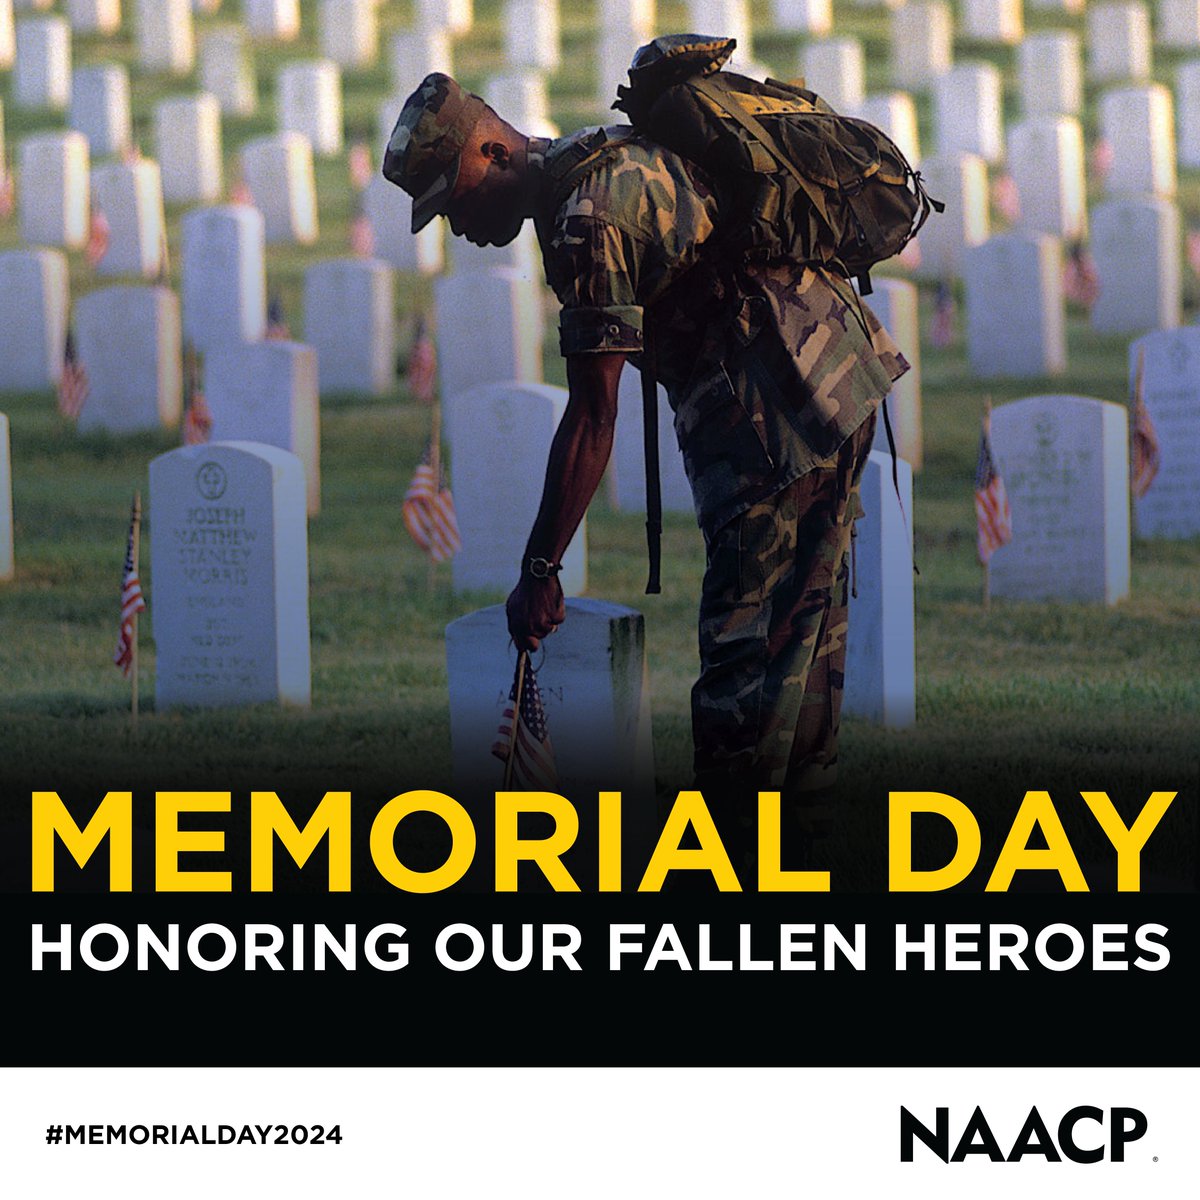 On this #MemorialDay, we honor the brave soldiers who served and sacrificed for our nation. Their courage and dedication paved the way toward freedom and justice. We remember and salute them today and always.